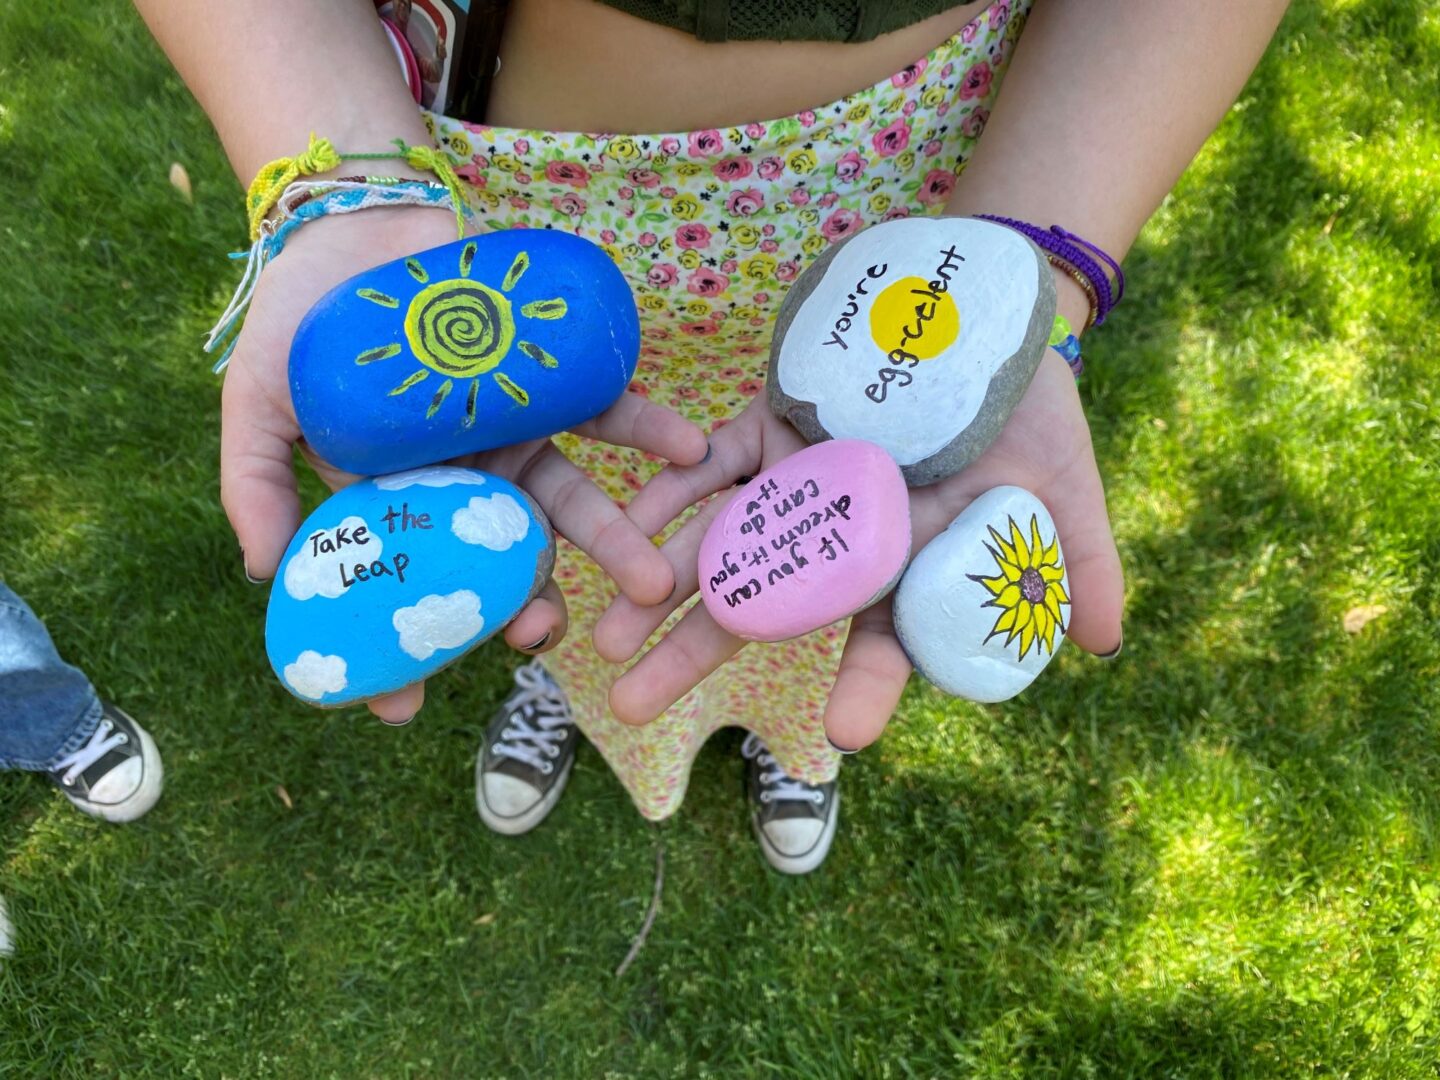 Two hands are holding five rocks that have been painted with positive messages, a sun, and one has a sunflower.